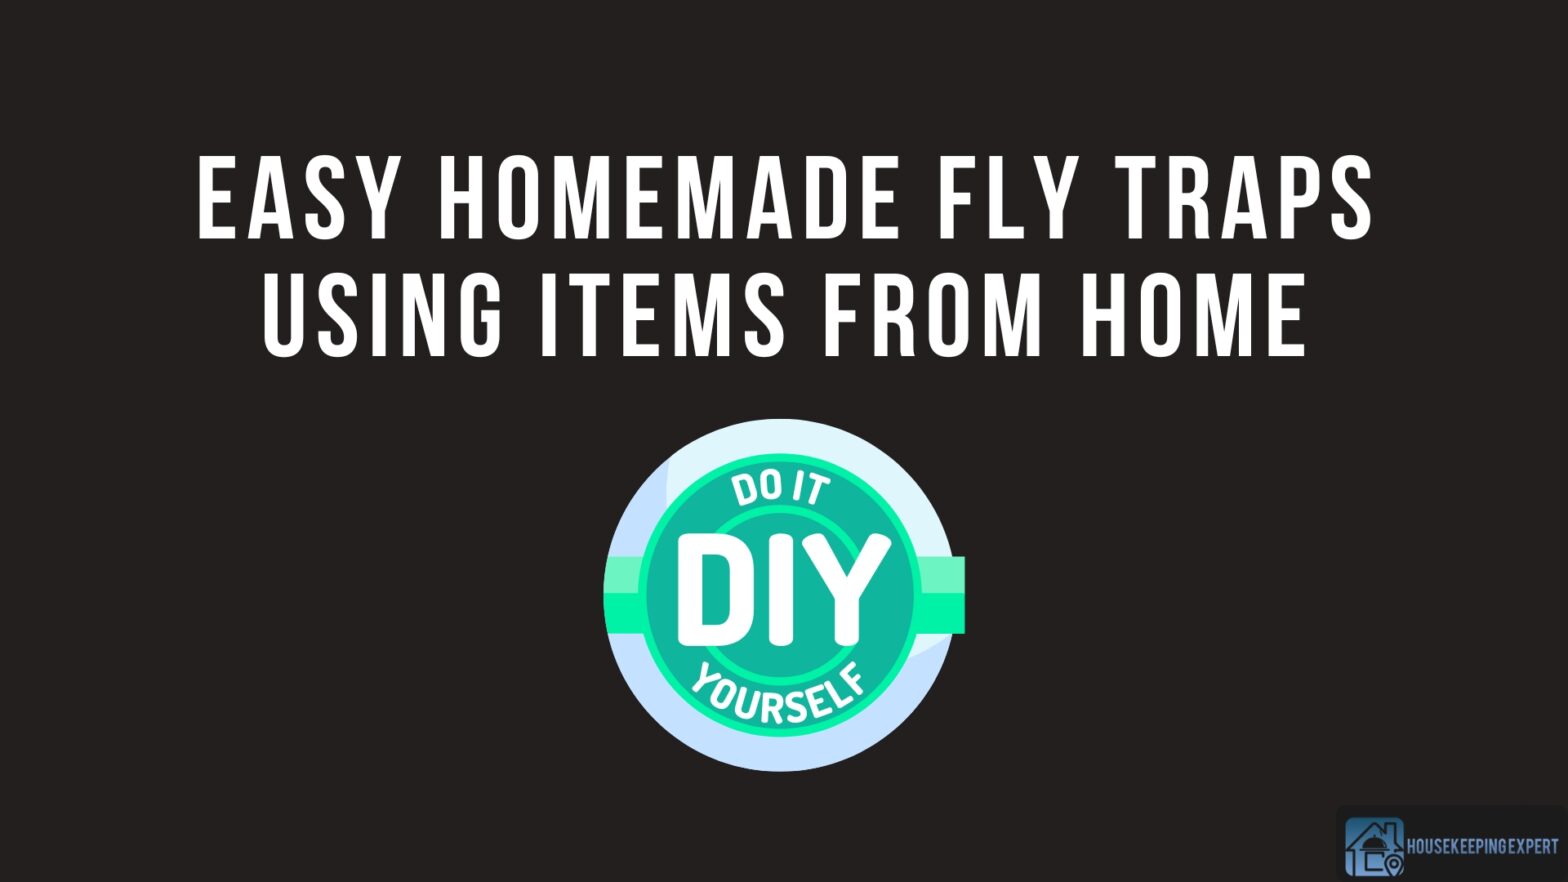 Easy Homemade Fly Traps Using Items From Home